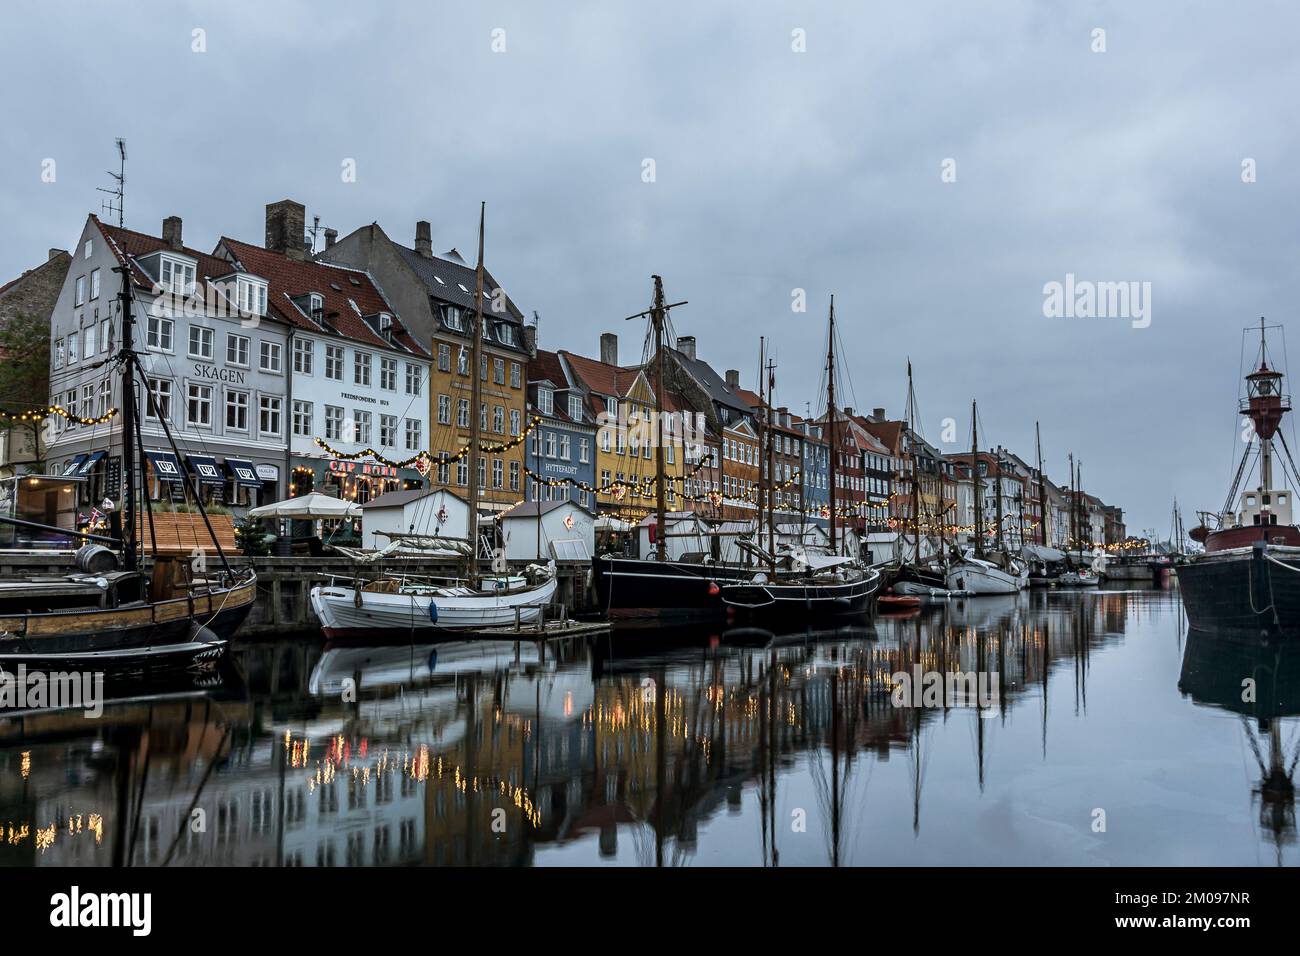 Christmas decorations reflecting in the water at Nyhavn canal in Copenhagen, November 9, 2017 Stock Photo